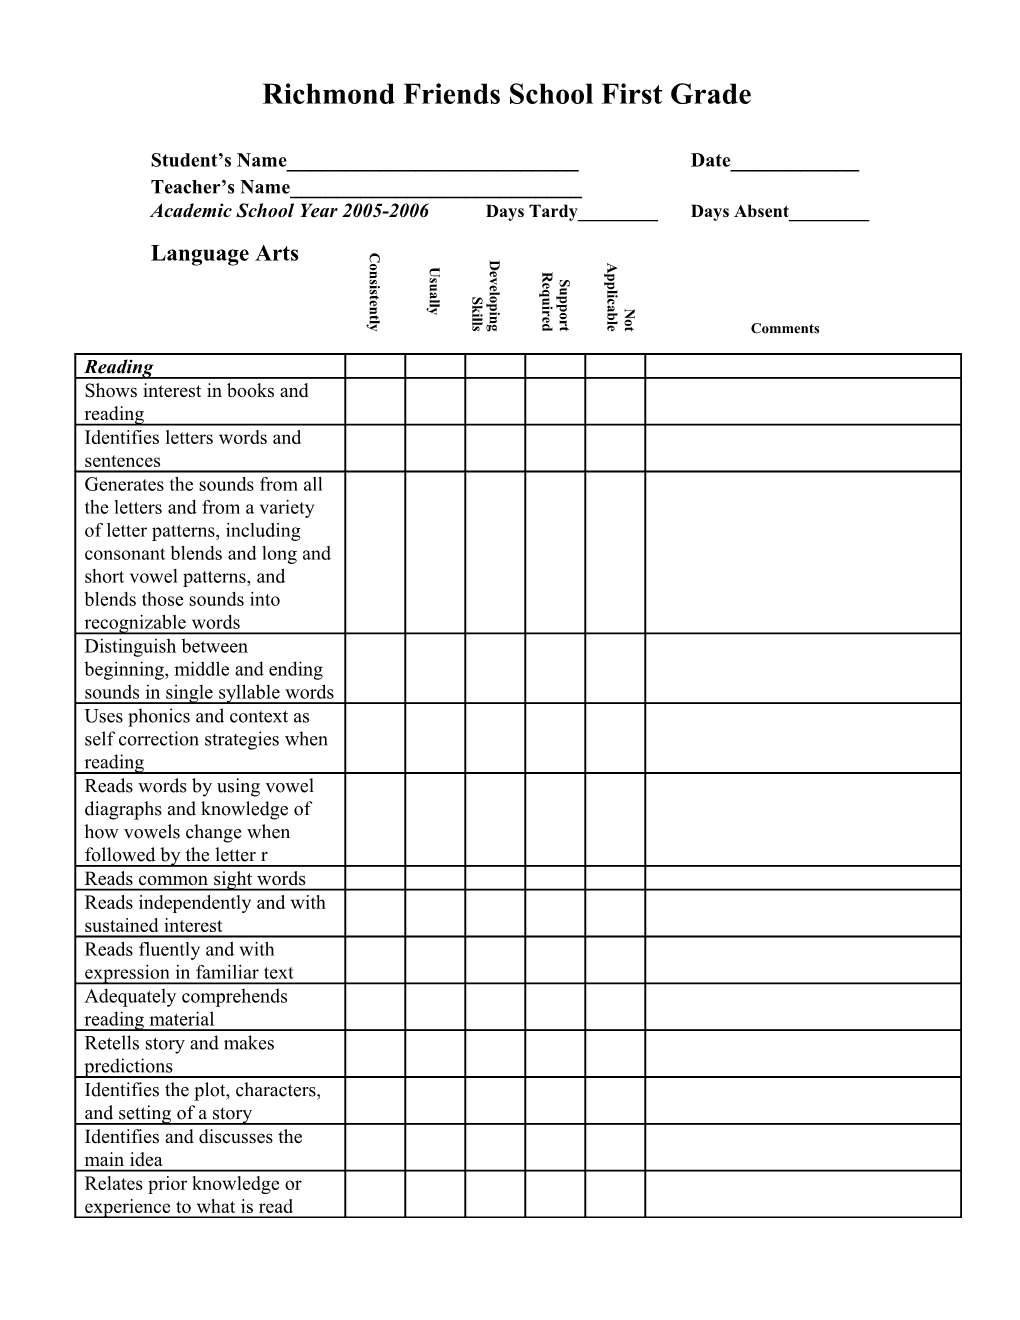 Richmond Friends School First and Second Grade Evaluation Form